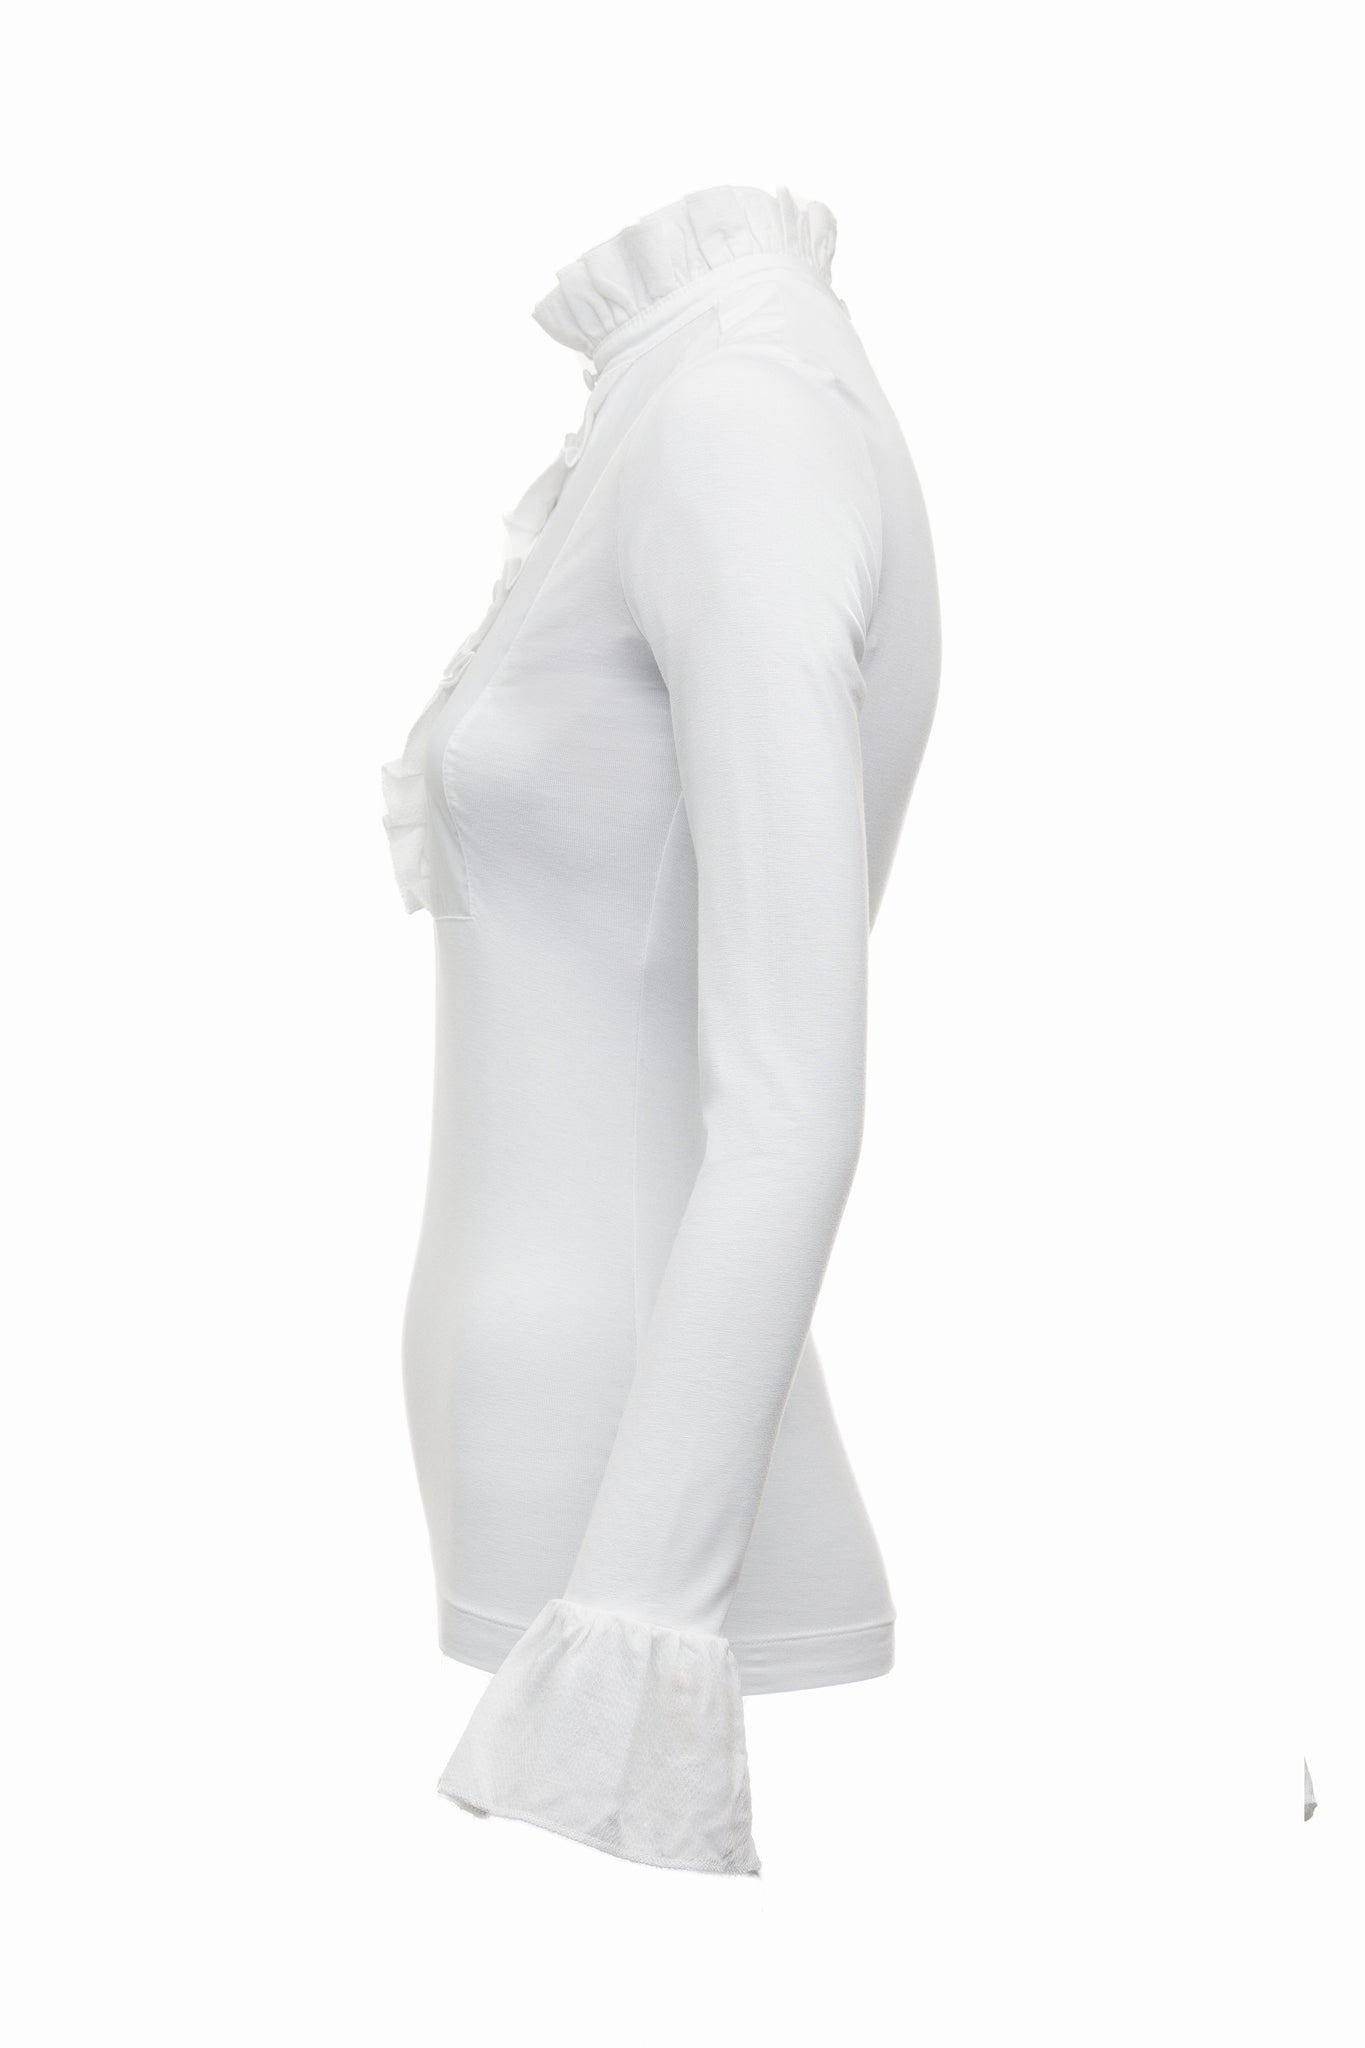 side image of a neatly fitted white long sleeve top with ruffled neckline and cuffs with frilly chest detail